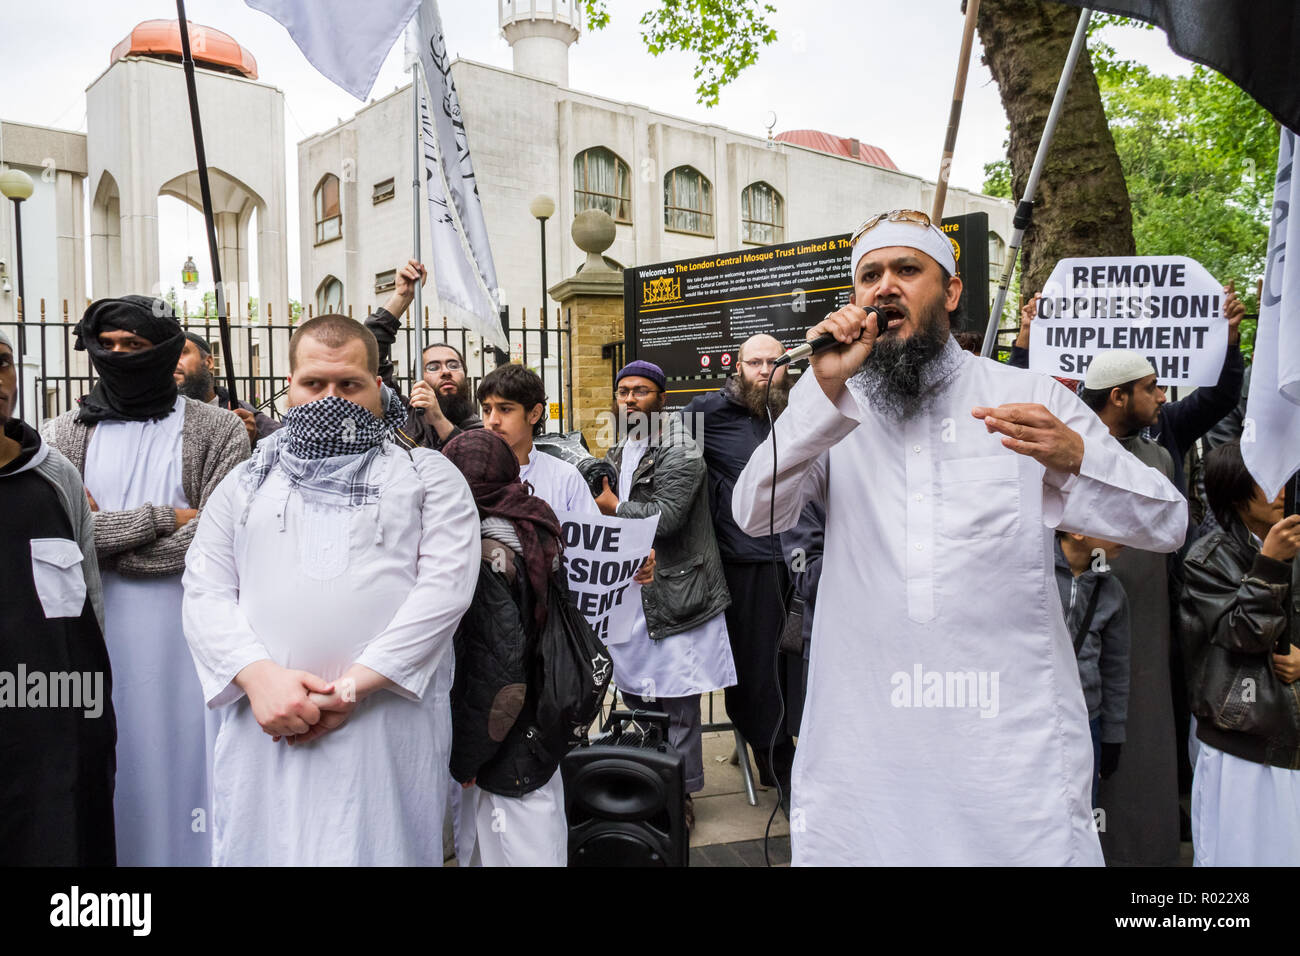 London, UK. 30th May, 2014. File Image from 30-05-2014: Lewis Ludlow, 26, from Rochester in Kent, a Muslim convert (second left, face covering) also used the name Ali Hussain, is due to be sentenced for plotting an Islamic State-inspired attack on Oxford Street in which he hoped to kill 100 people. Ludlow is seen here in 2014 outside the London Central Mosque during a protest organised by banned Al-Muhajiroun (ALM) members. Credit: Guy Corbishley/Alamy Live News Stock Photo